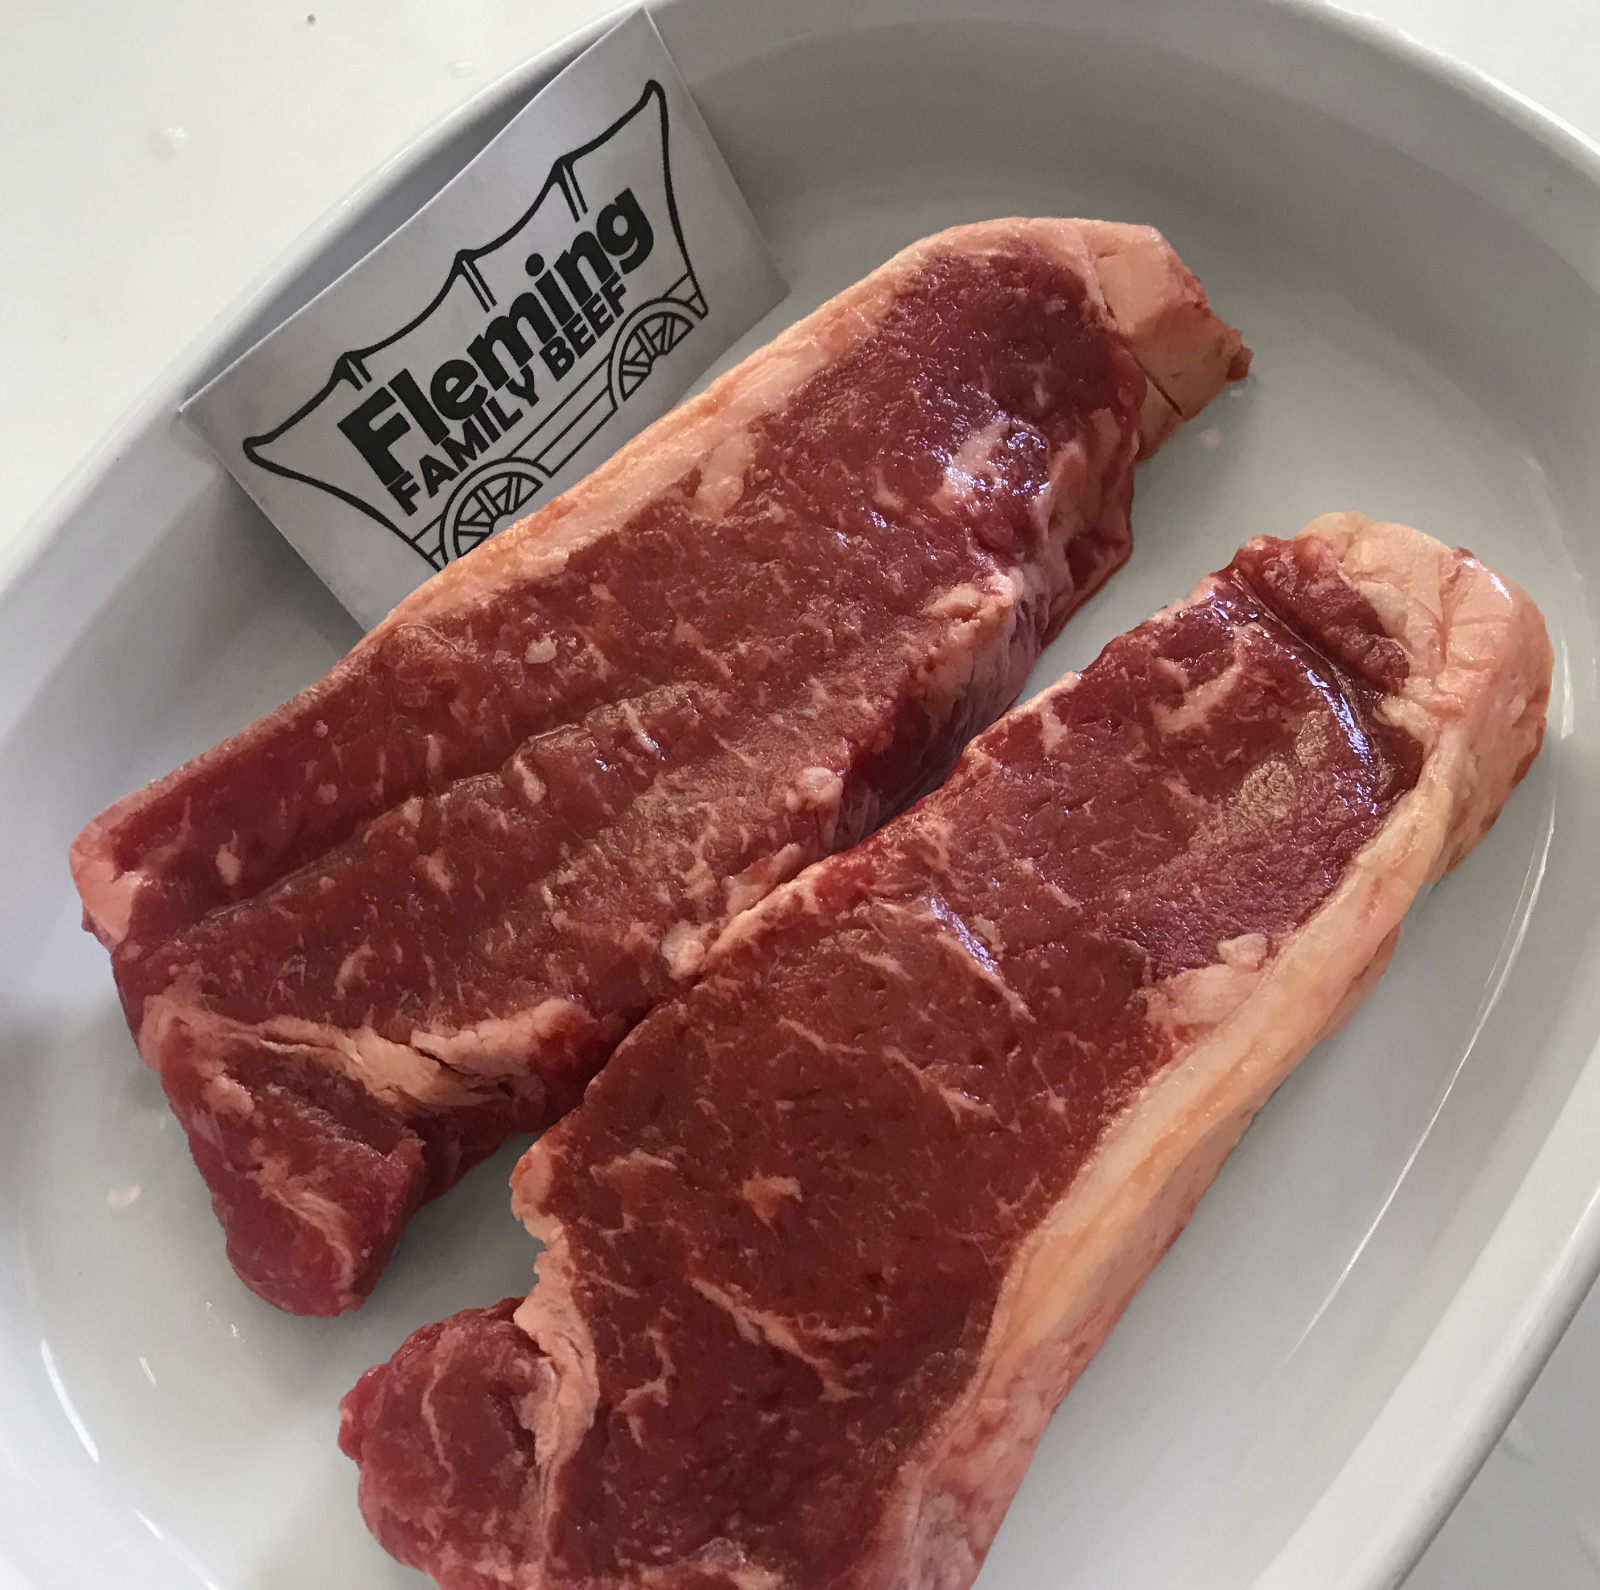 new-york-strip-steaks-dry-aged-charolais-2-steaks-150-lb-average-package-weight-flash-frozen